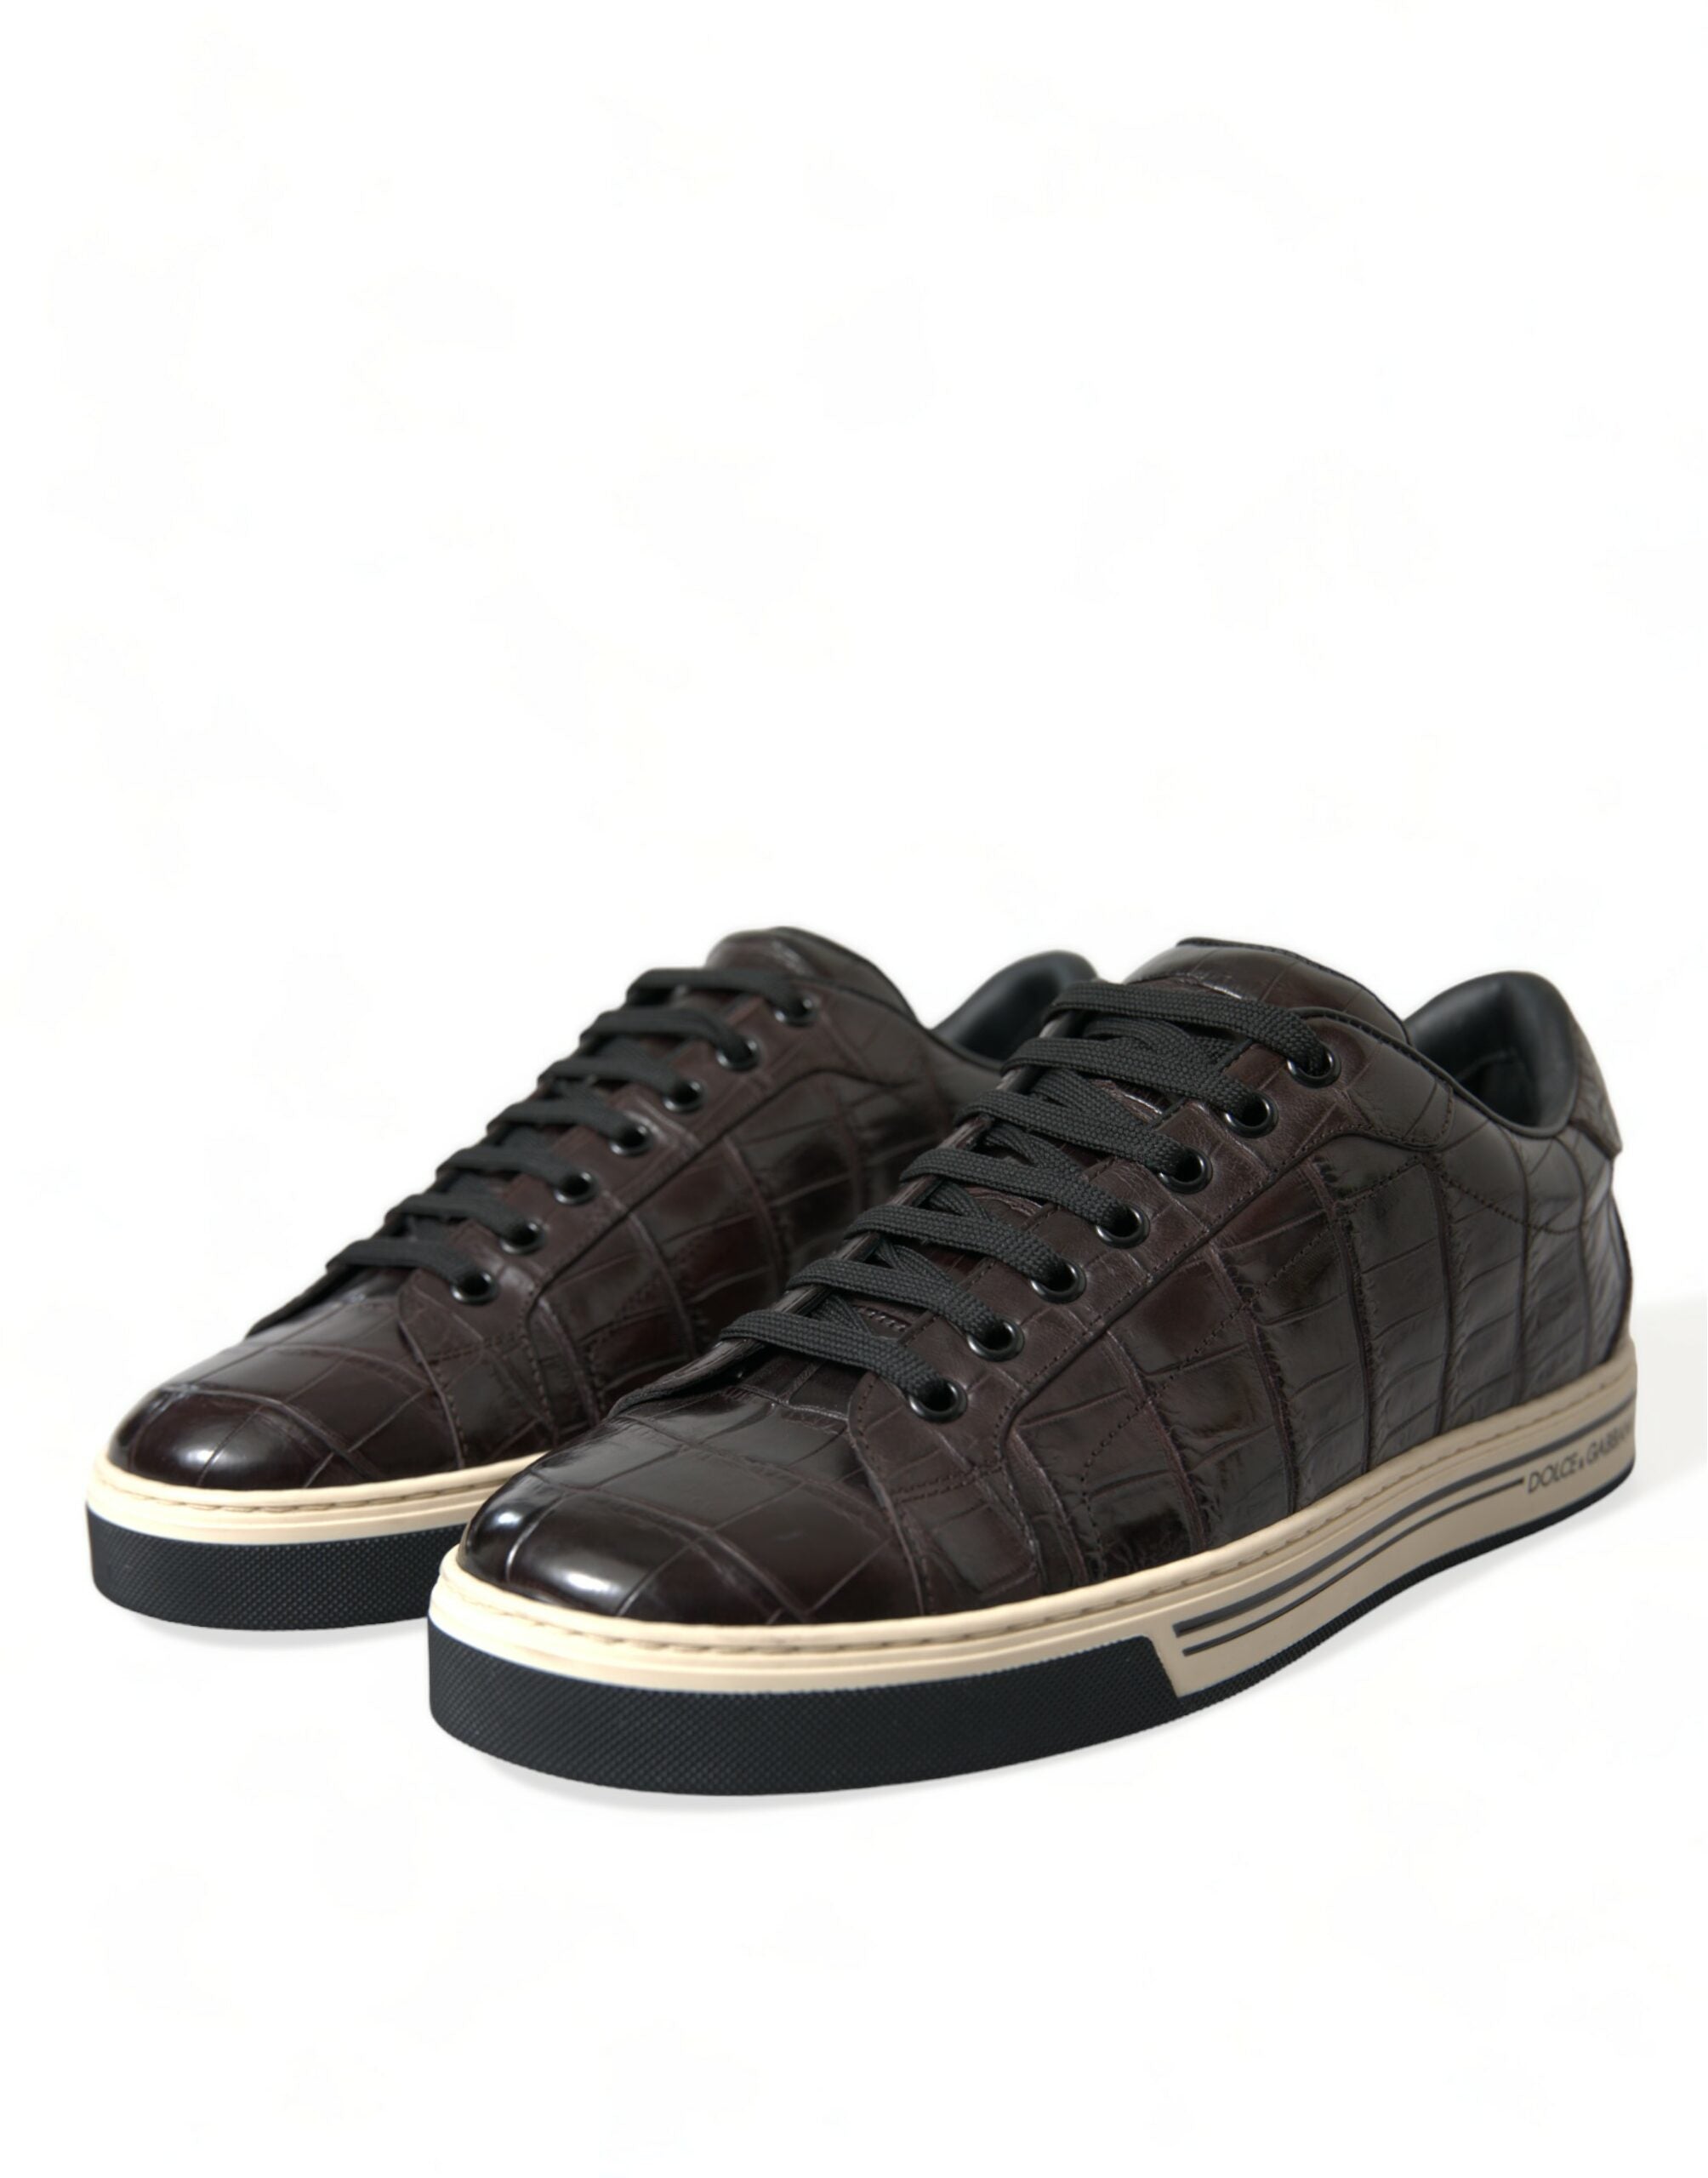 Dolce & Gabbana Elegant Exotic Leather Low-Top Sneakers